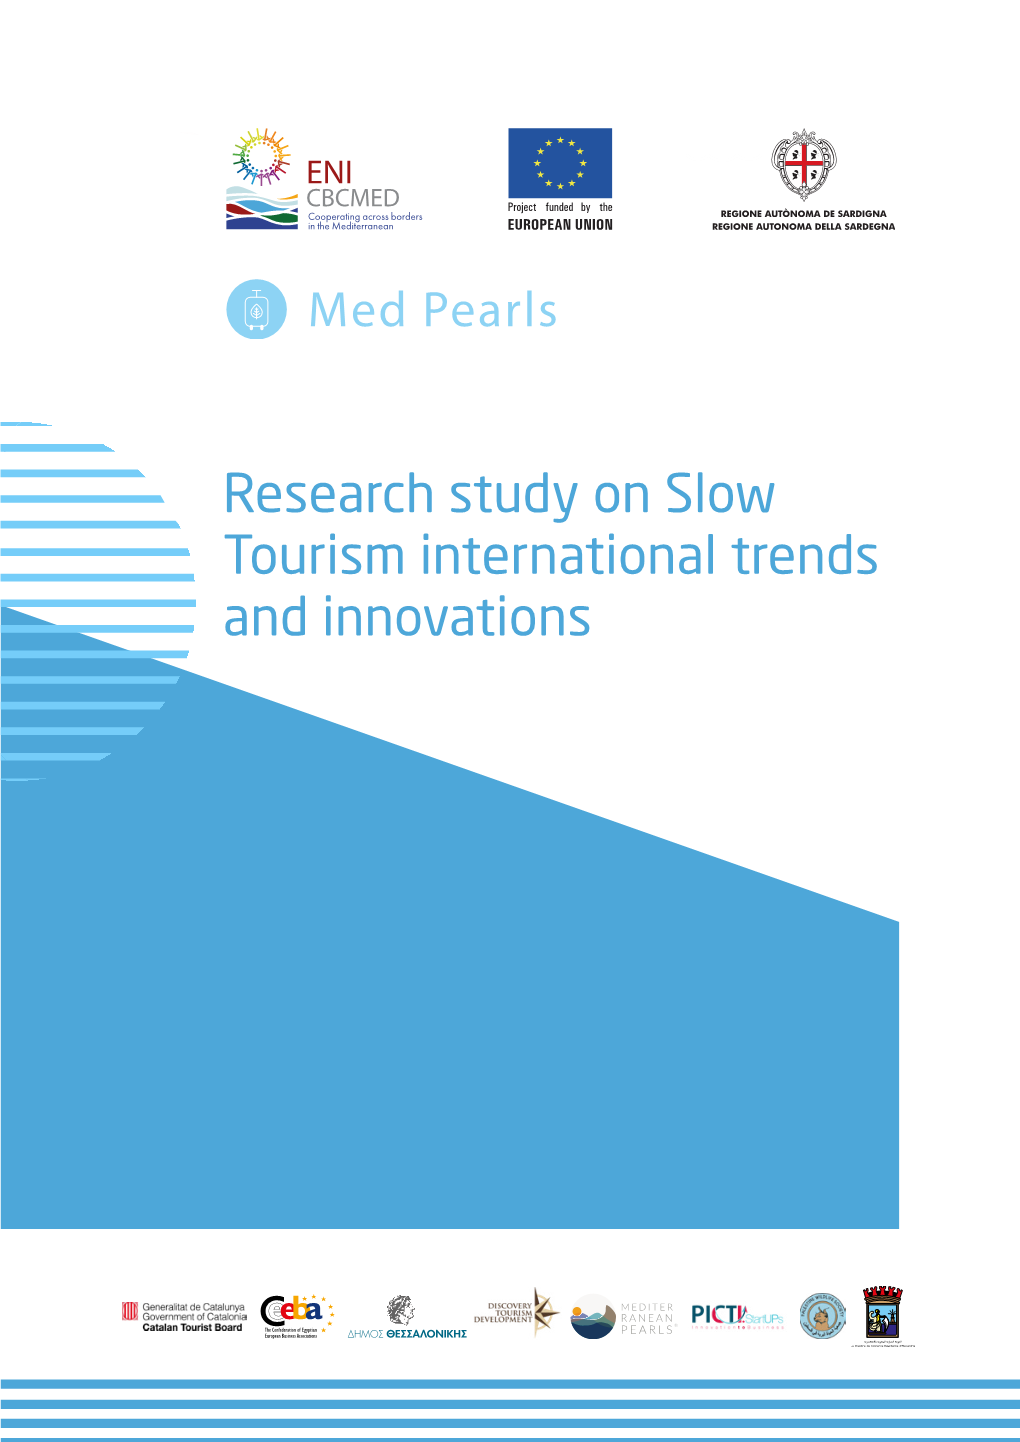 Research Study on Slow Tourism International Trends and Innovations CHAPTER 4: Destinations with a Slow Tourism Offer